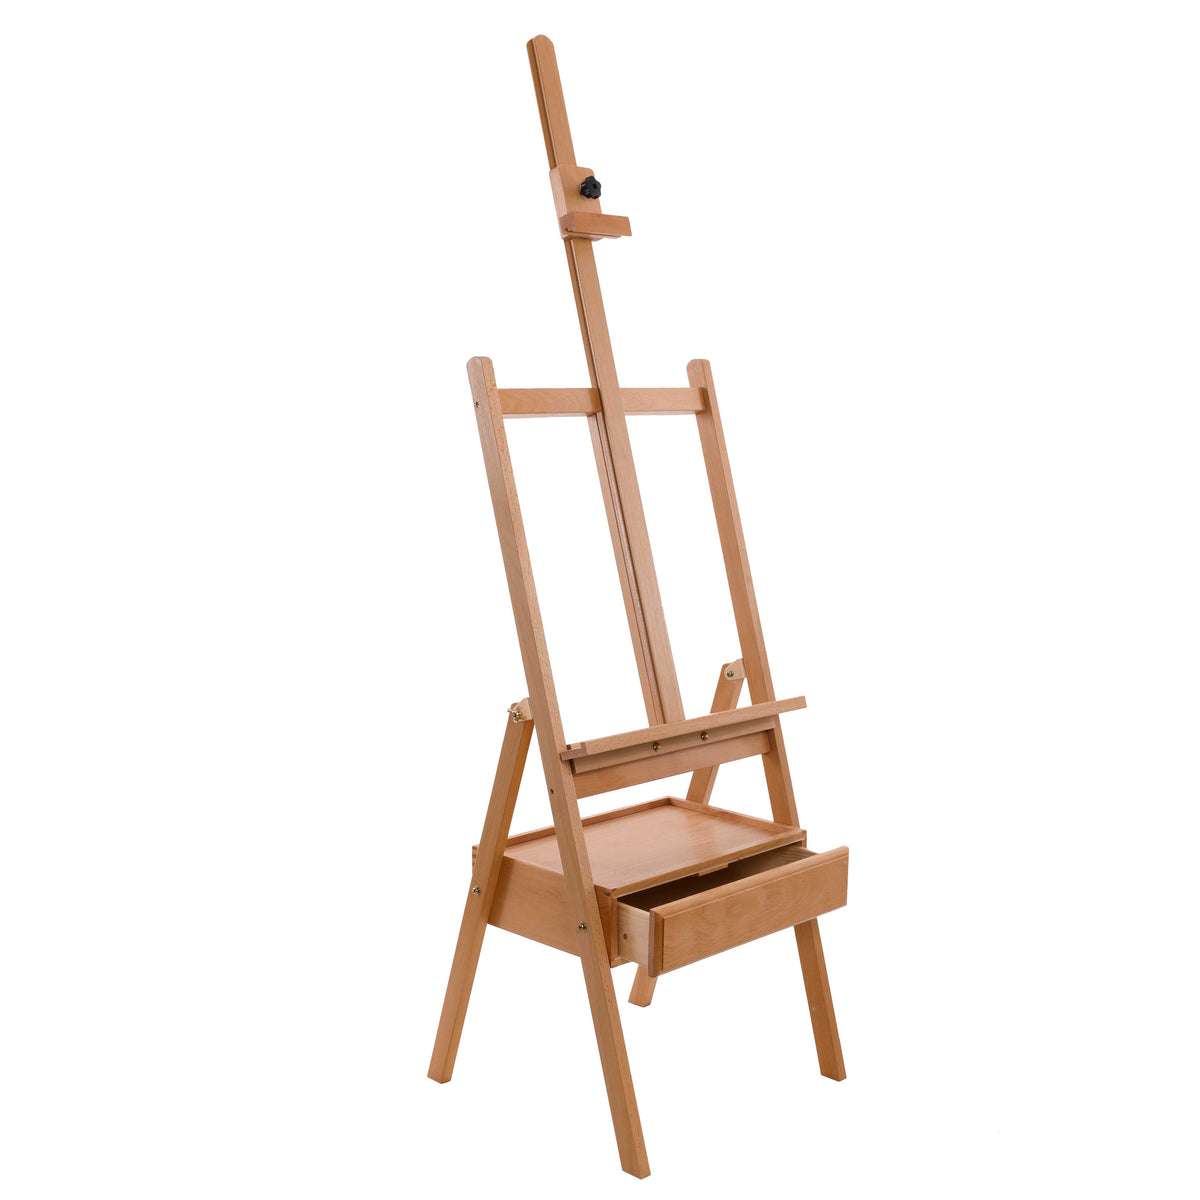 MEEDEN Wooden Easel Stand for Display, Adjustable Art Easel for Painting,  Holds Canvas up to 60, Solid Beech Wood Floor Easel for Adults, Heavy Duty